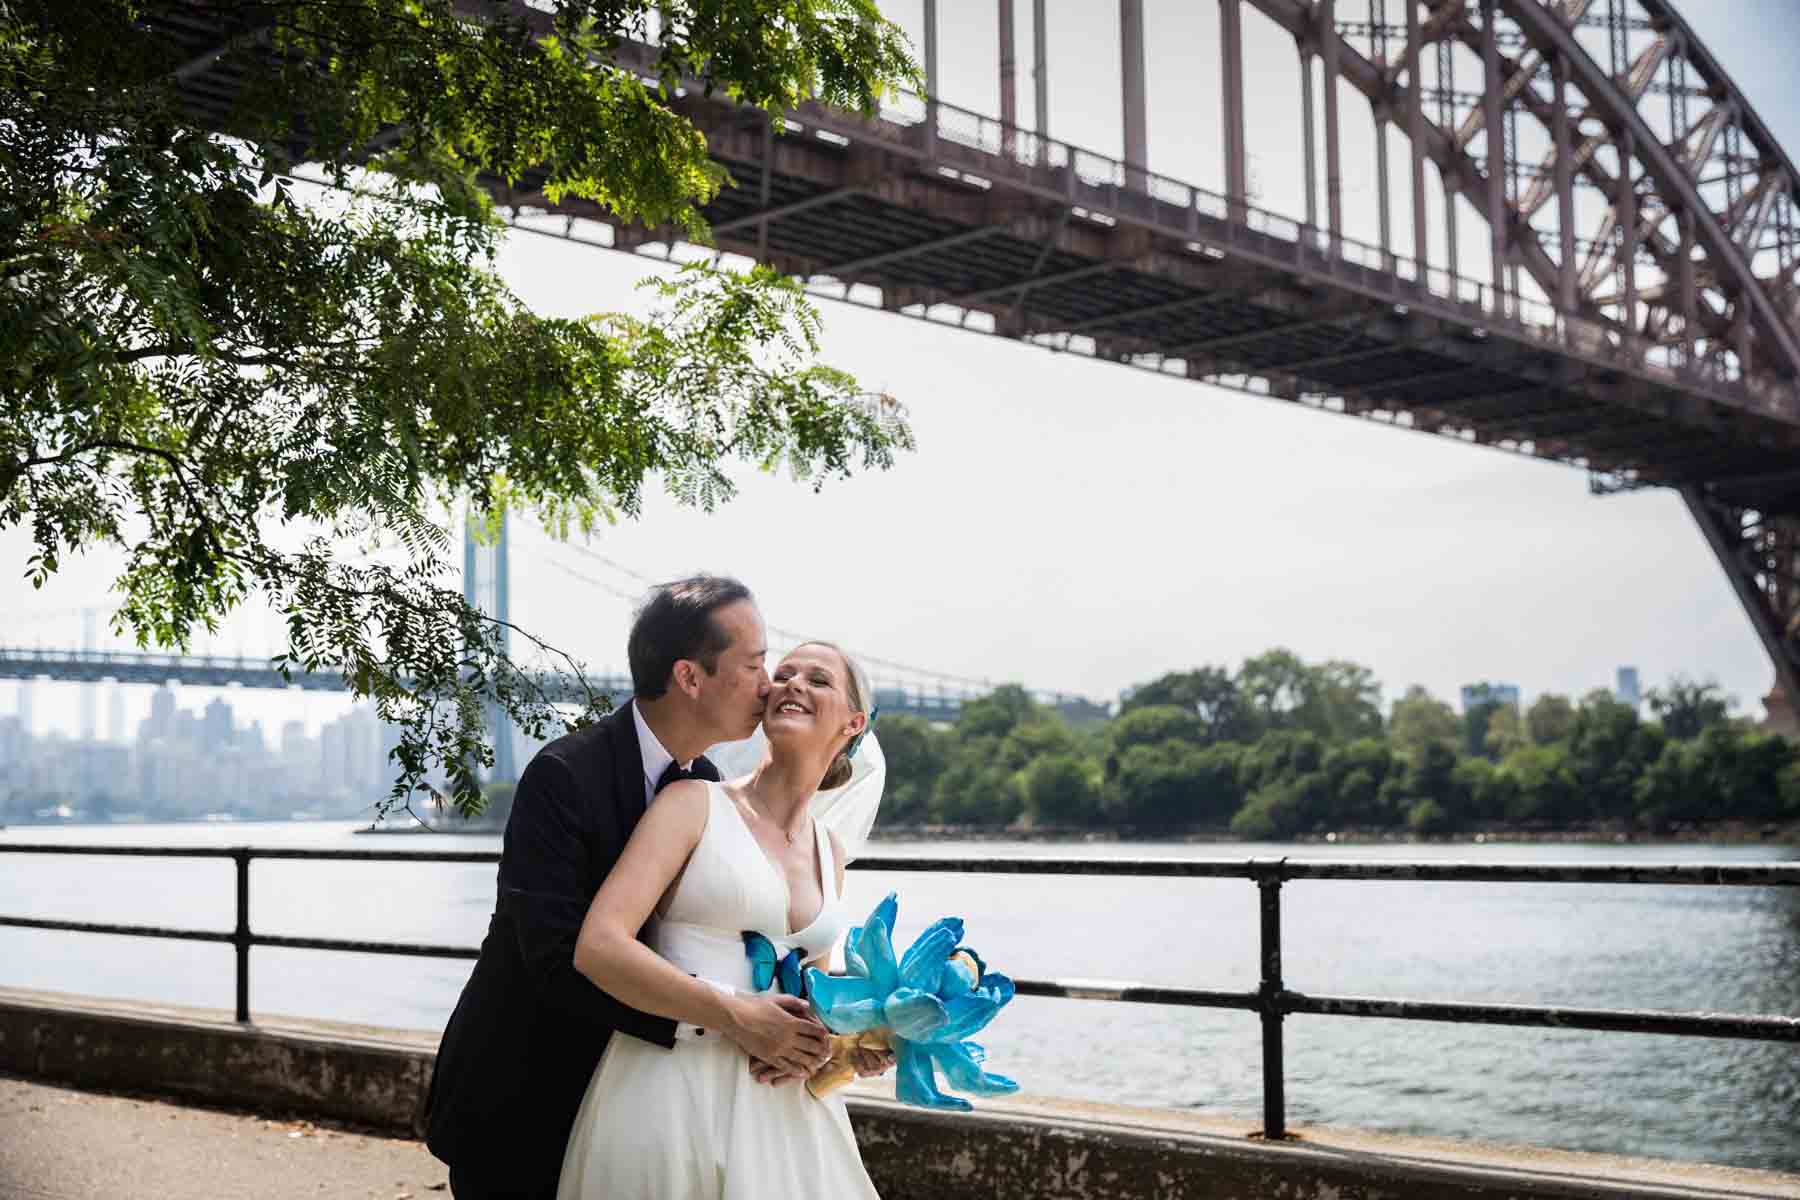 Groom kissing bride on cheek along waterfront with Hell Gate Bridge in background in Astoria Park